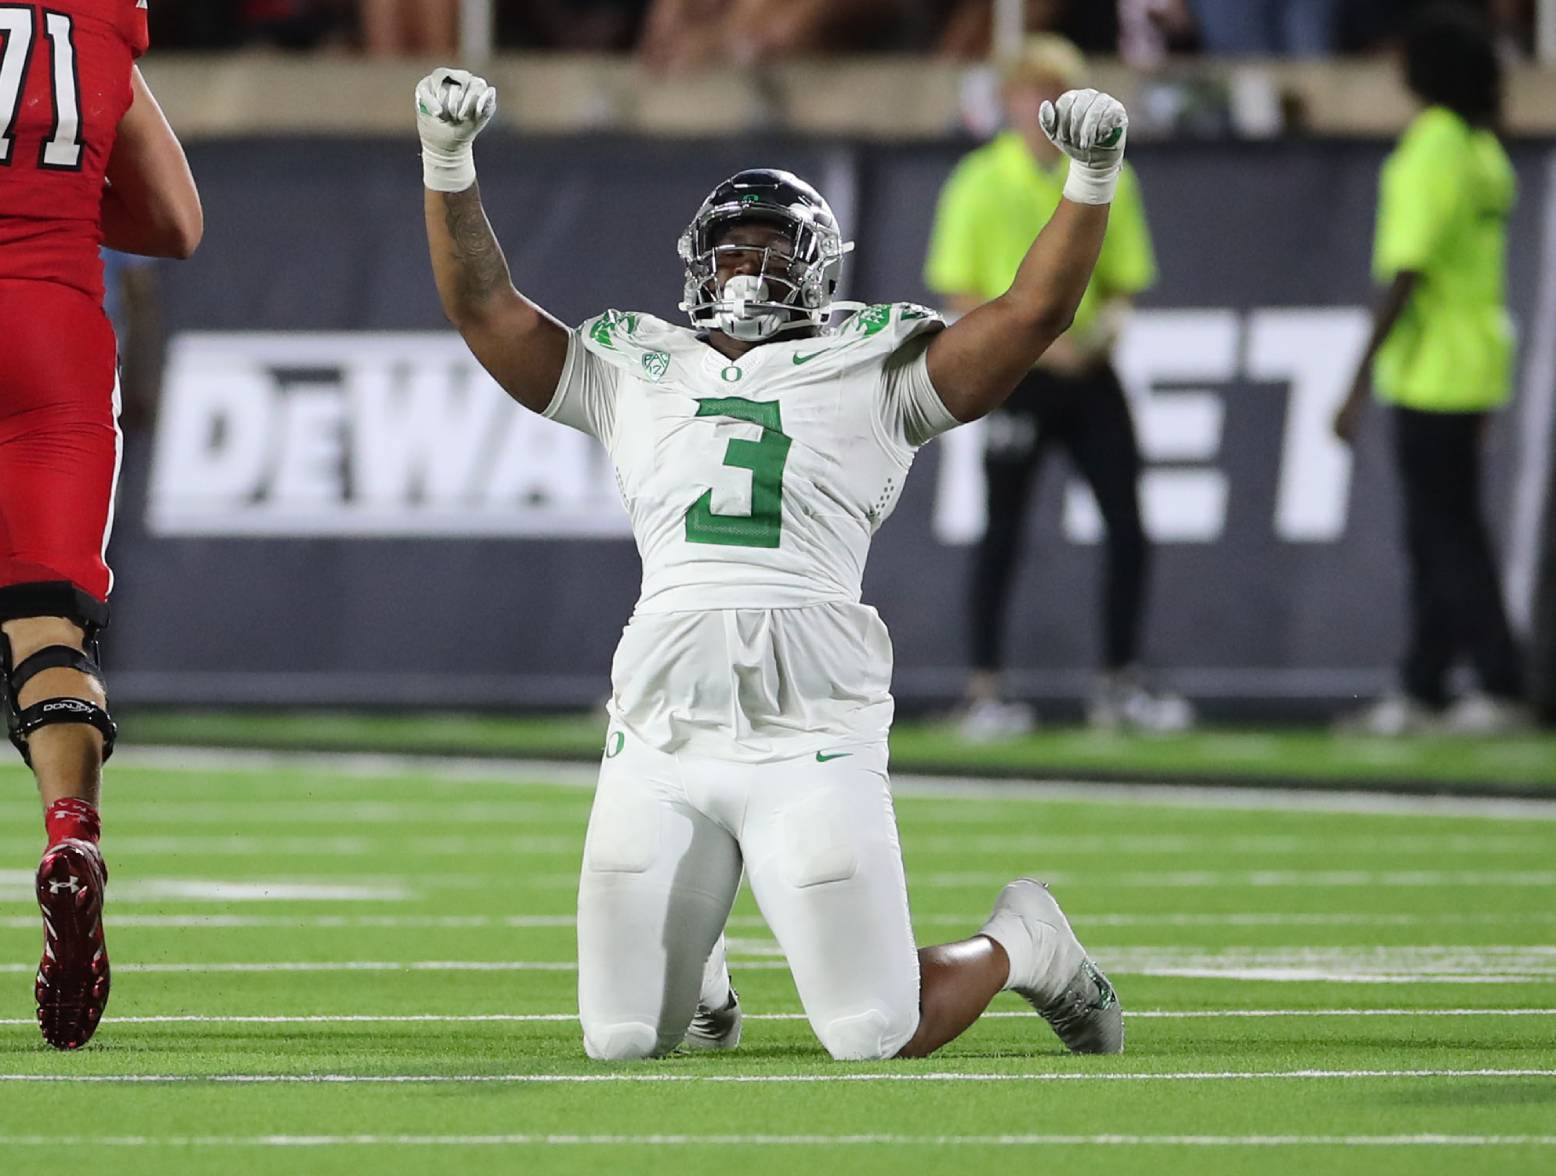 Sep 9, 2023; Lubbock, Texas, USA; Oregon Ducks defensive end Brandon Dorlus (3) reacts at the end of the game after an interception of the Texas Tech Red Raiders at Jones AT&T Stadium and Cody Campbell Field. Credit: Michael C. Johnson-USA TODAY Sports